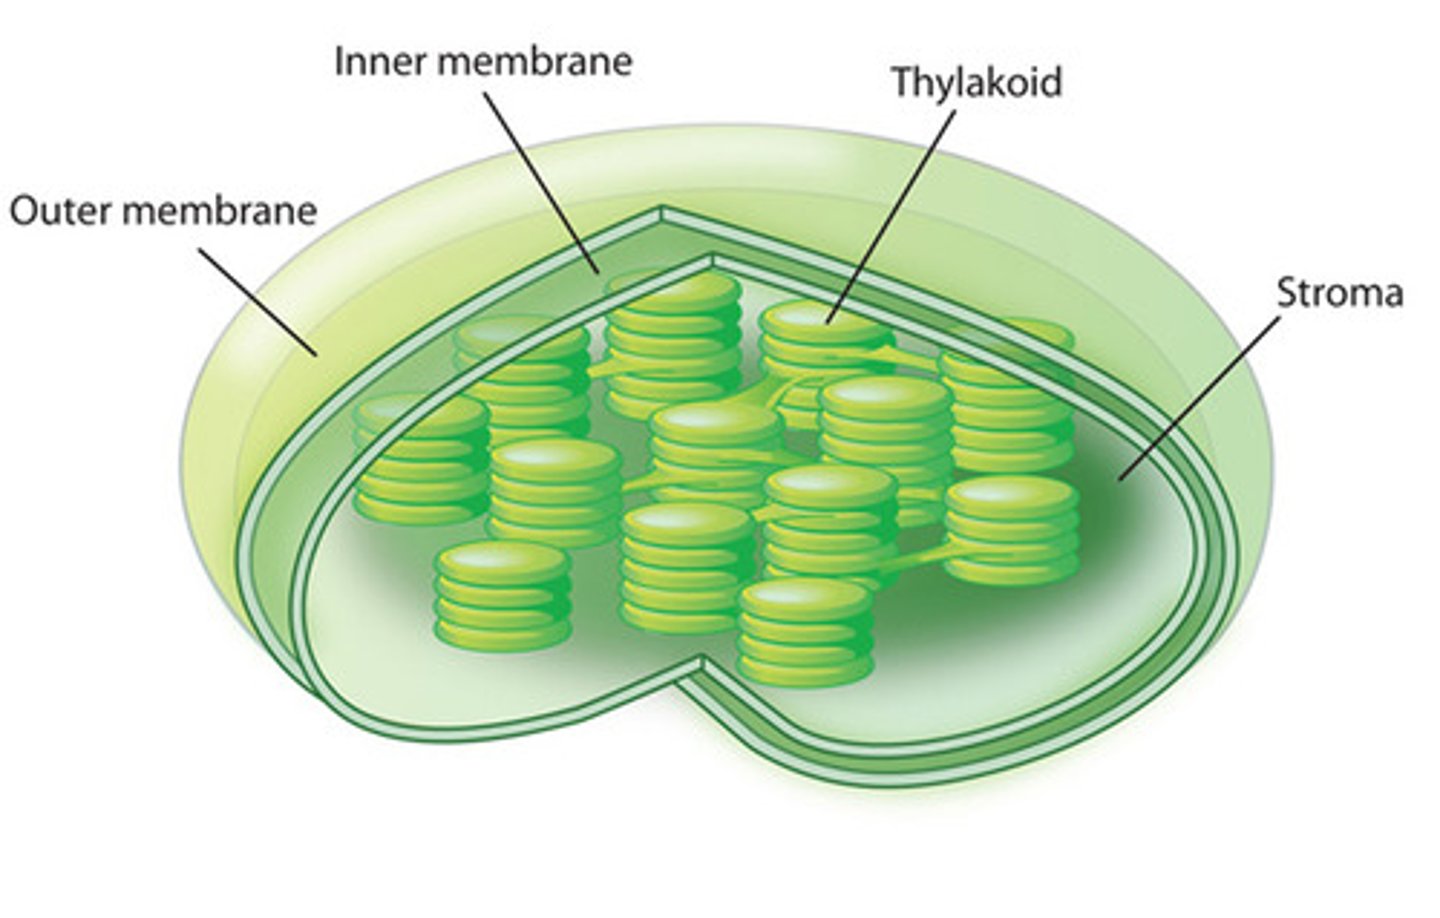 <p>organelle found in cells of plants and some other organisms that captures the energy from sunlight and converts it into chemical energy; site of photosynthesis</p>